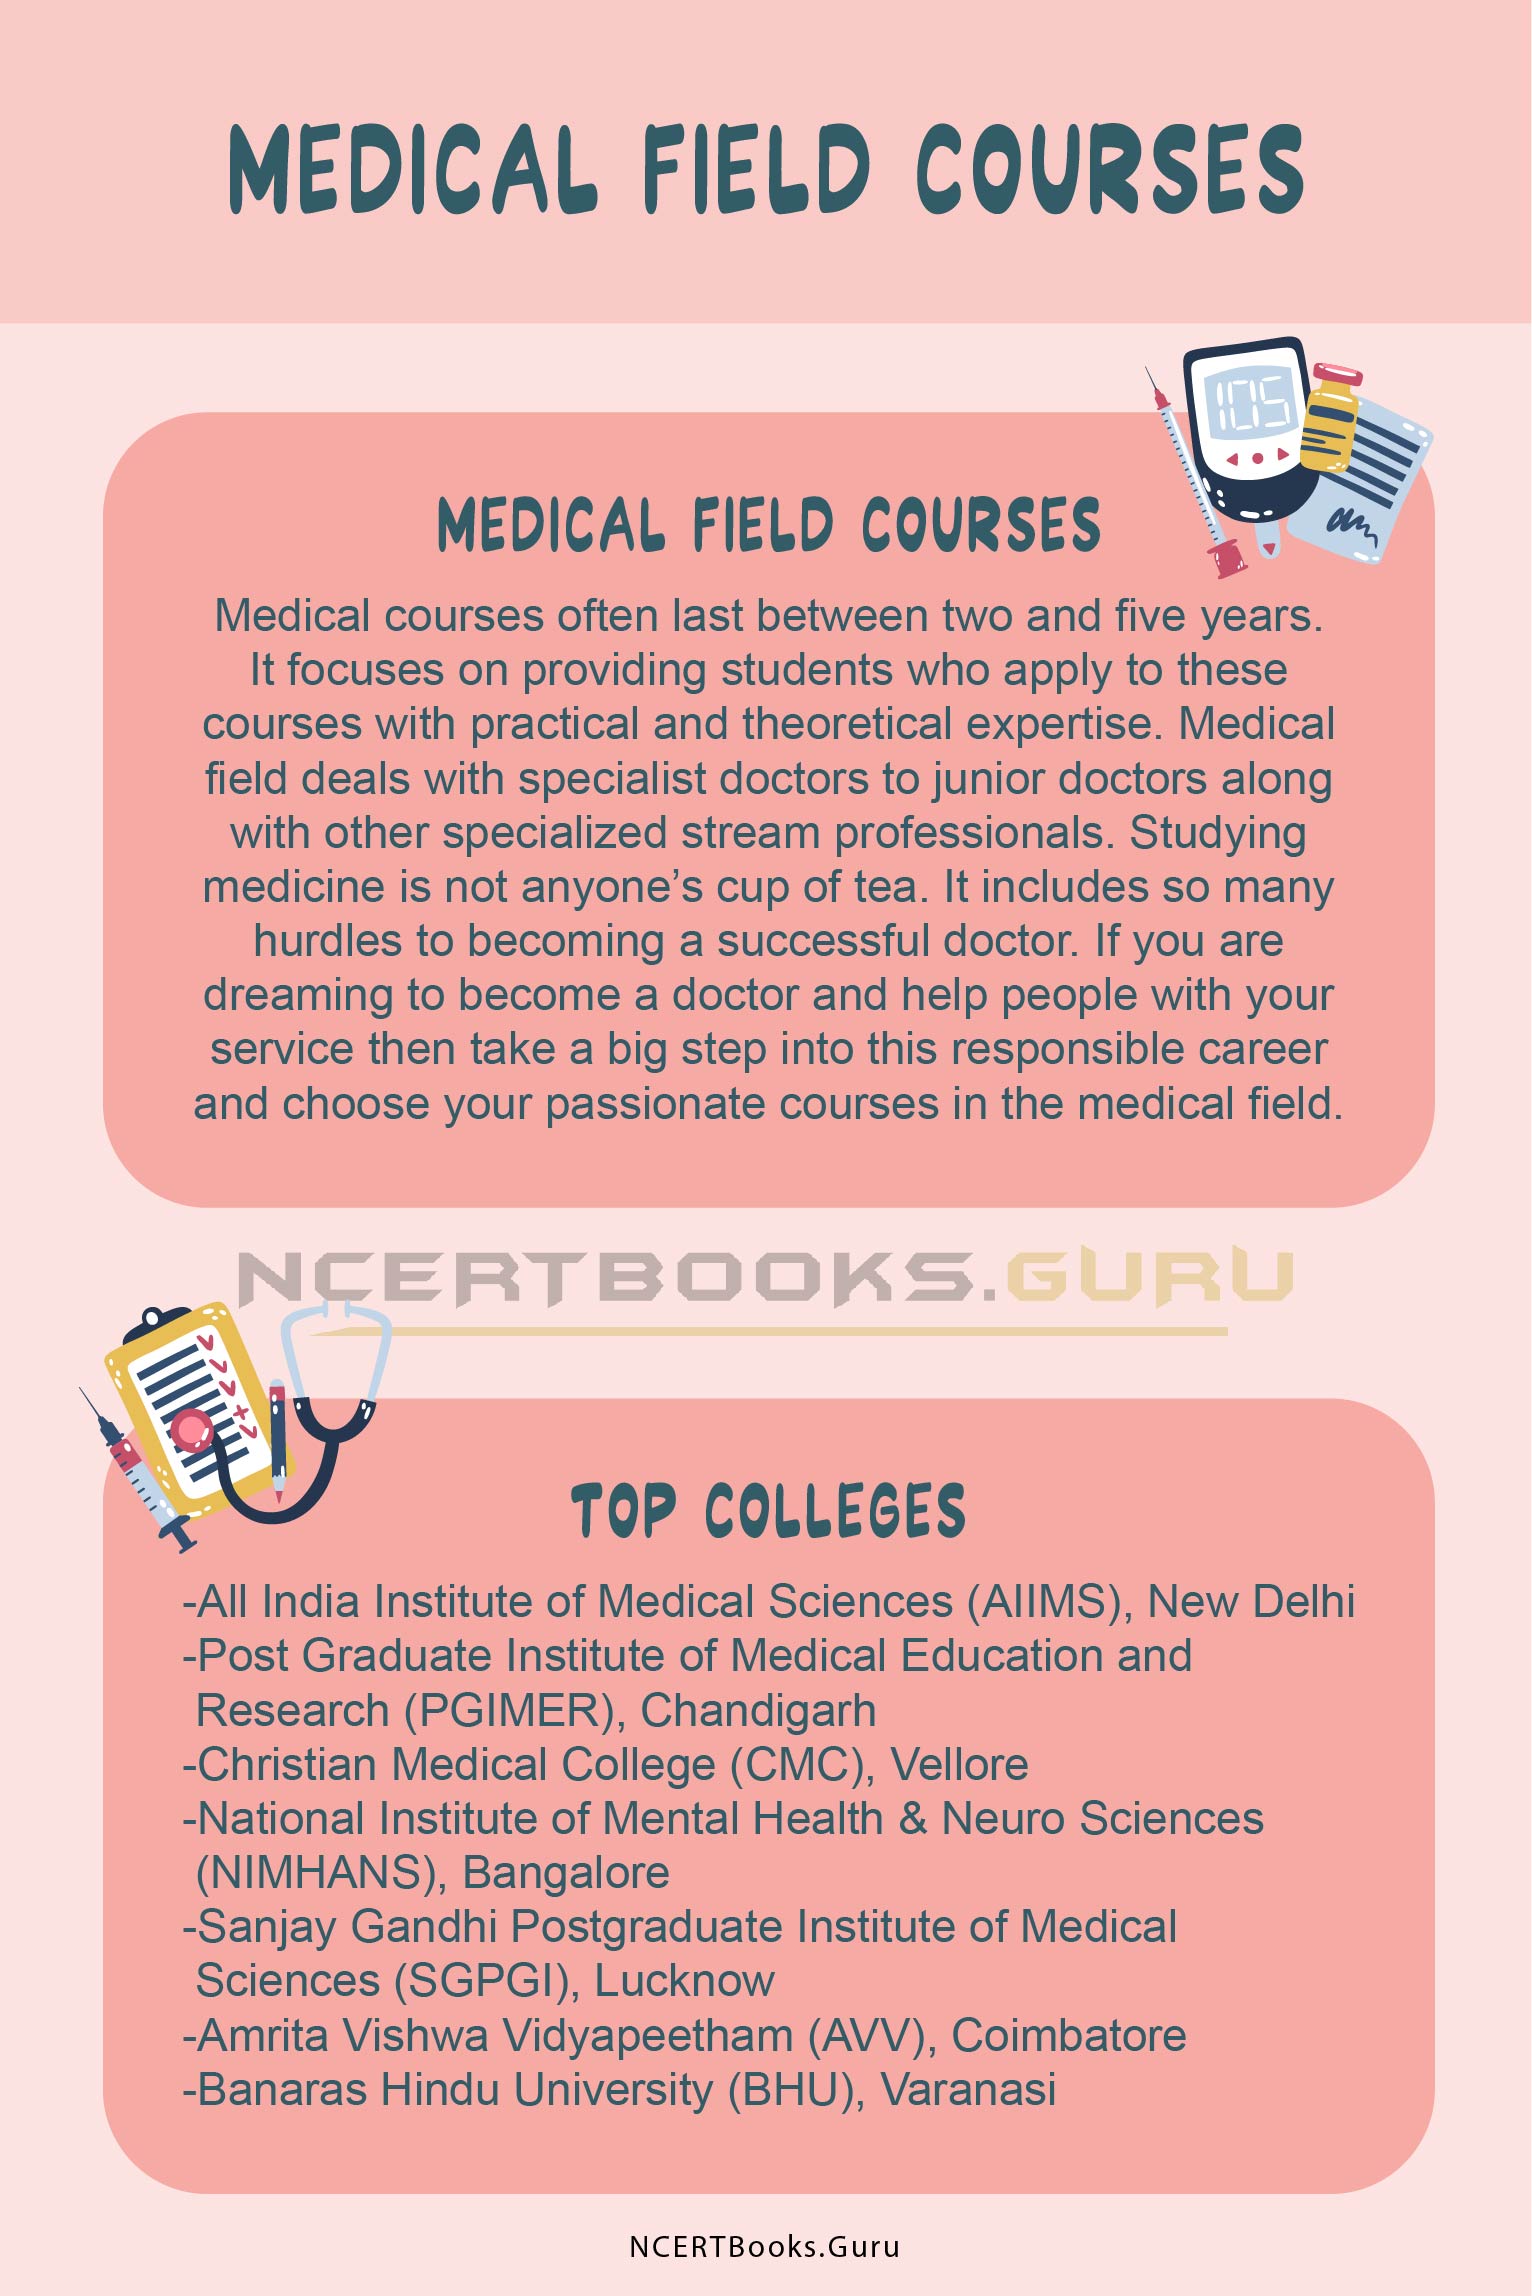 Medical Field Courses